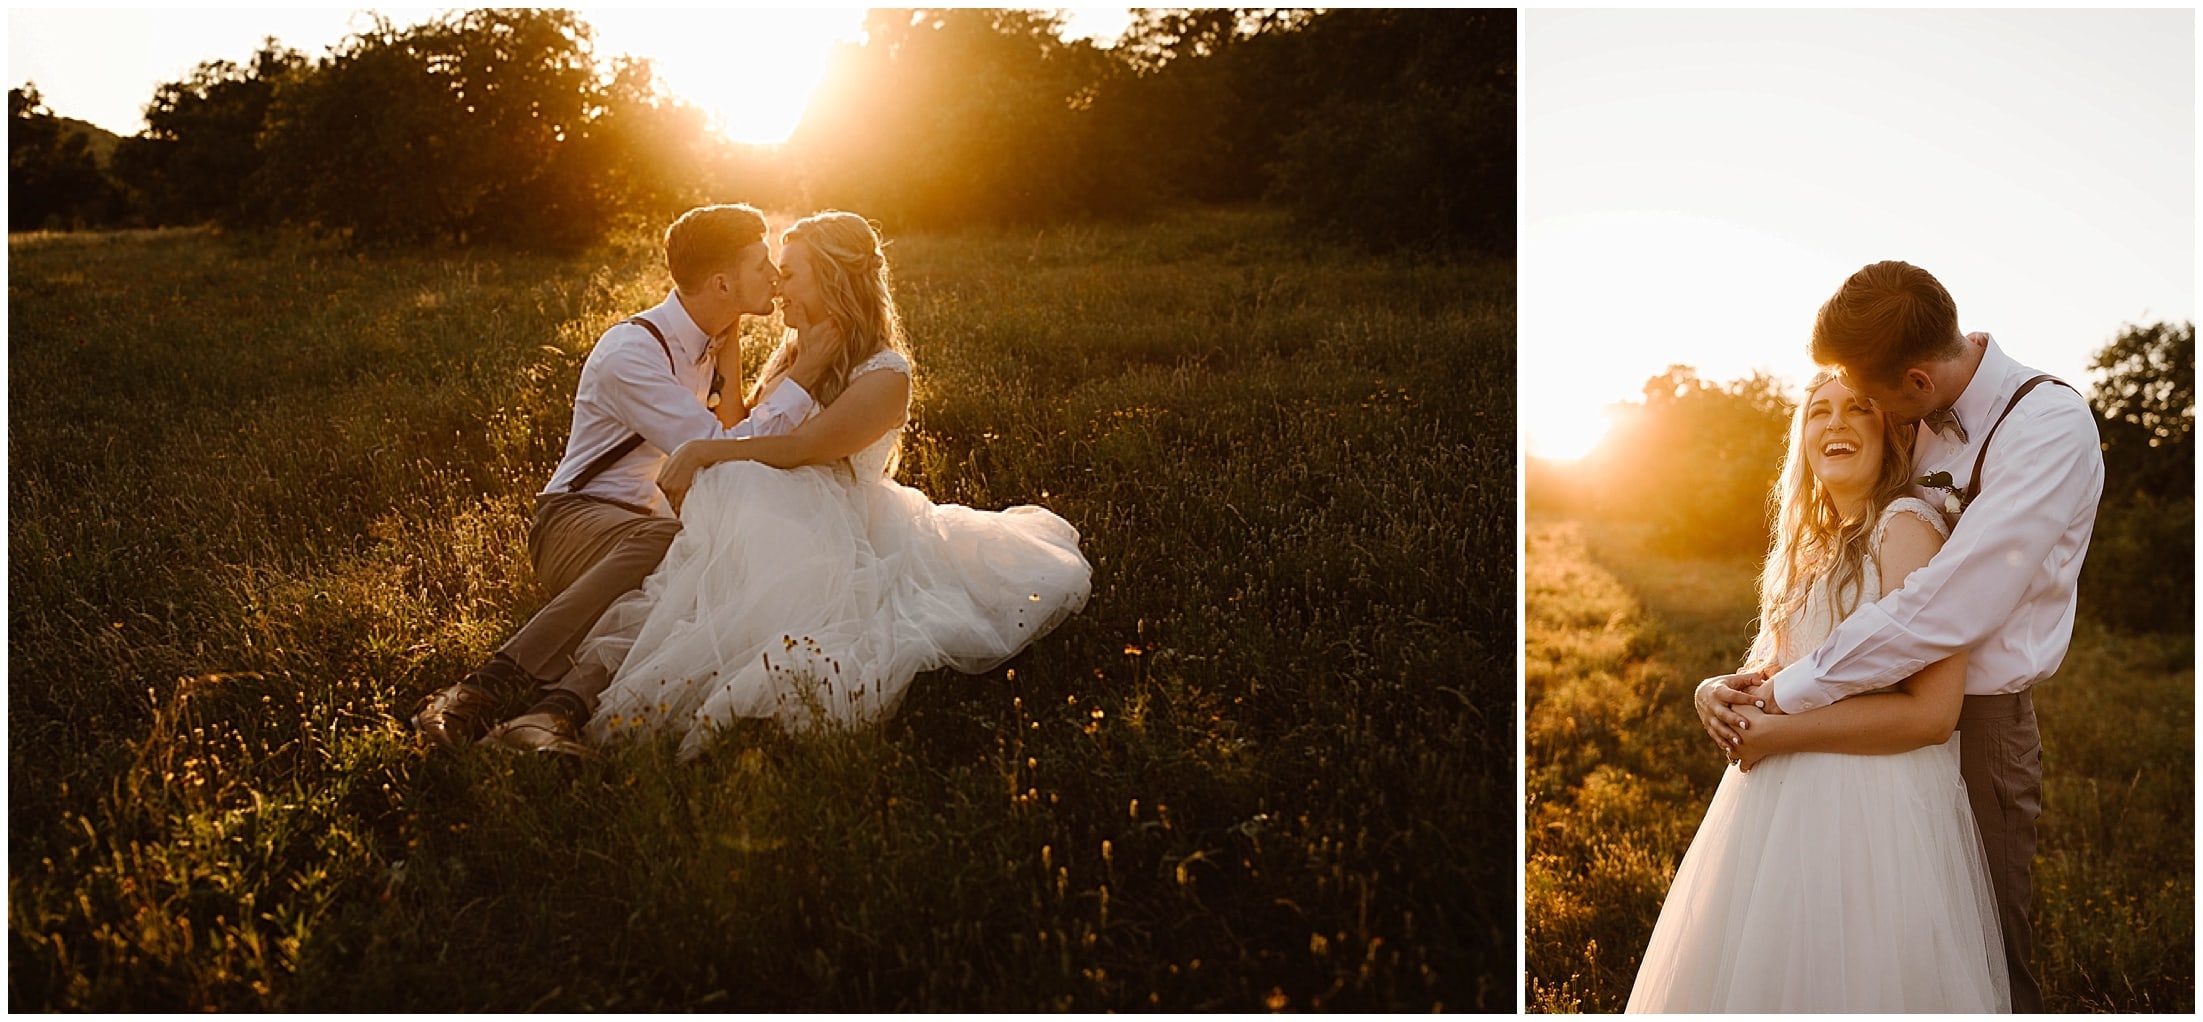 bride and groom intimate photos in texas sunset field,Brit Nicole Photography, West Texas Barn Wedding, West Texas Small Wedding, West Texas wedding venue, DJ Platinum, Vera Wang engagement ring, Zales Manly Bands wedding ring, David's Bridal wedding dress, Krazy Cakes brides wedding cake, wedding cupcake, Betsey Johnson wedding high heels, Joy's Downtown Flowers wedding decor, Sparrow Creek Ranch, texas wedding ranch, places to get married in Texas, small intimate wedding, summer wedding, texas sky, bride and groom first look, first look with dad, matching bridesmaids robes, June wedding, junebug weddings, wandering weddings, the knot, best weddings